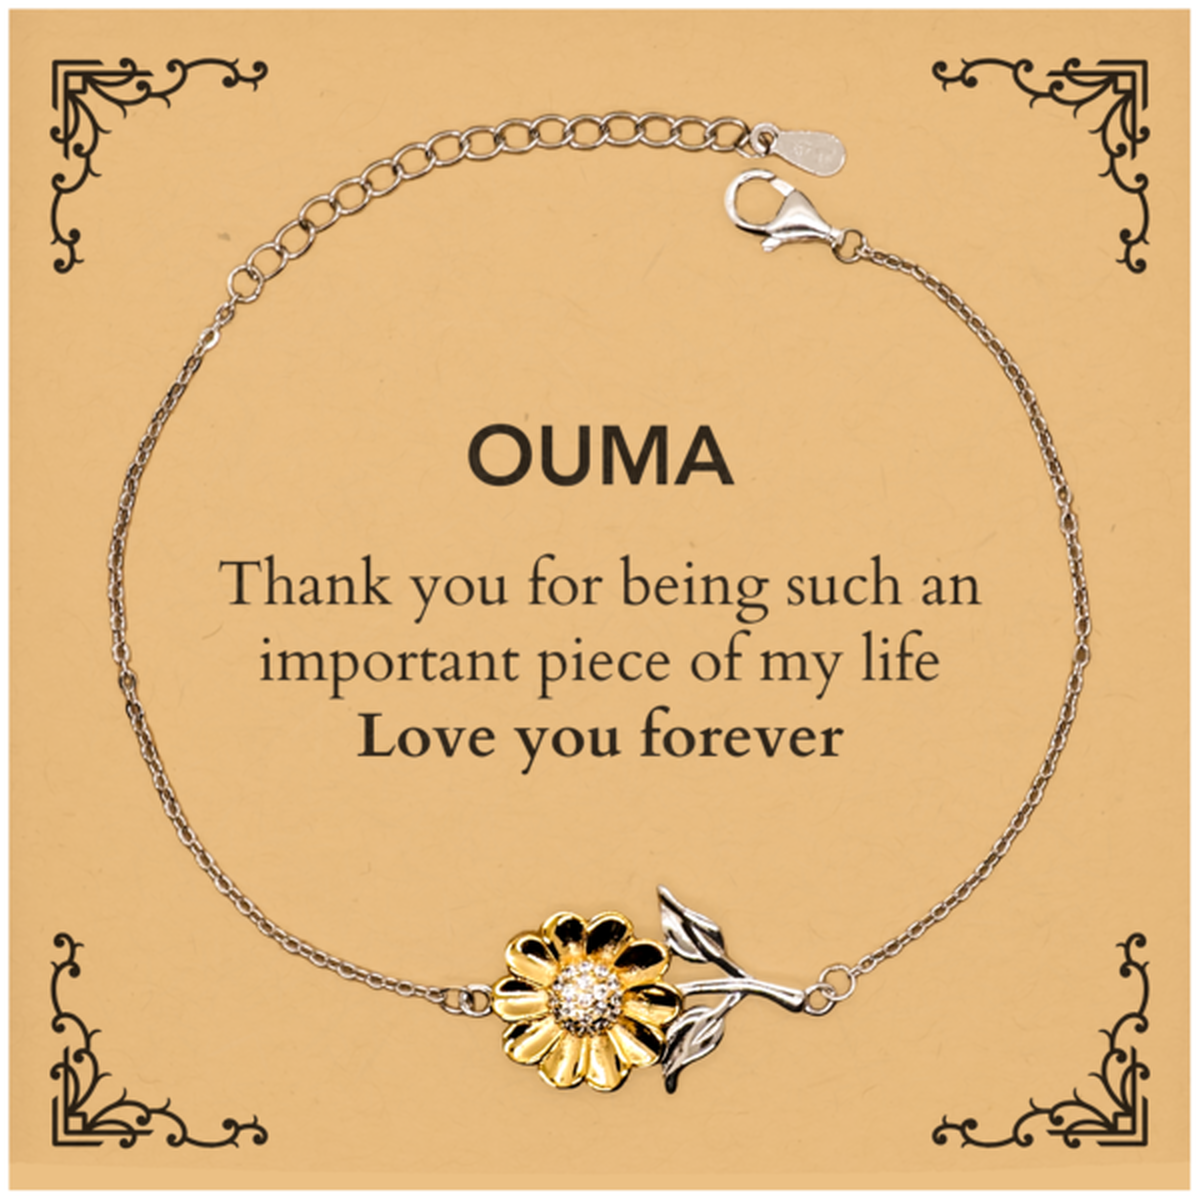 Appropriate Ouma Sunflower Bracelet Epic Birthday Gifts for Ouma Thank you for being such an important piece of my life Ouma Christmas Mothers Fathers Day